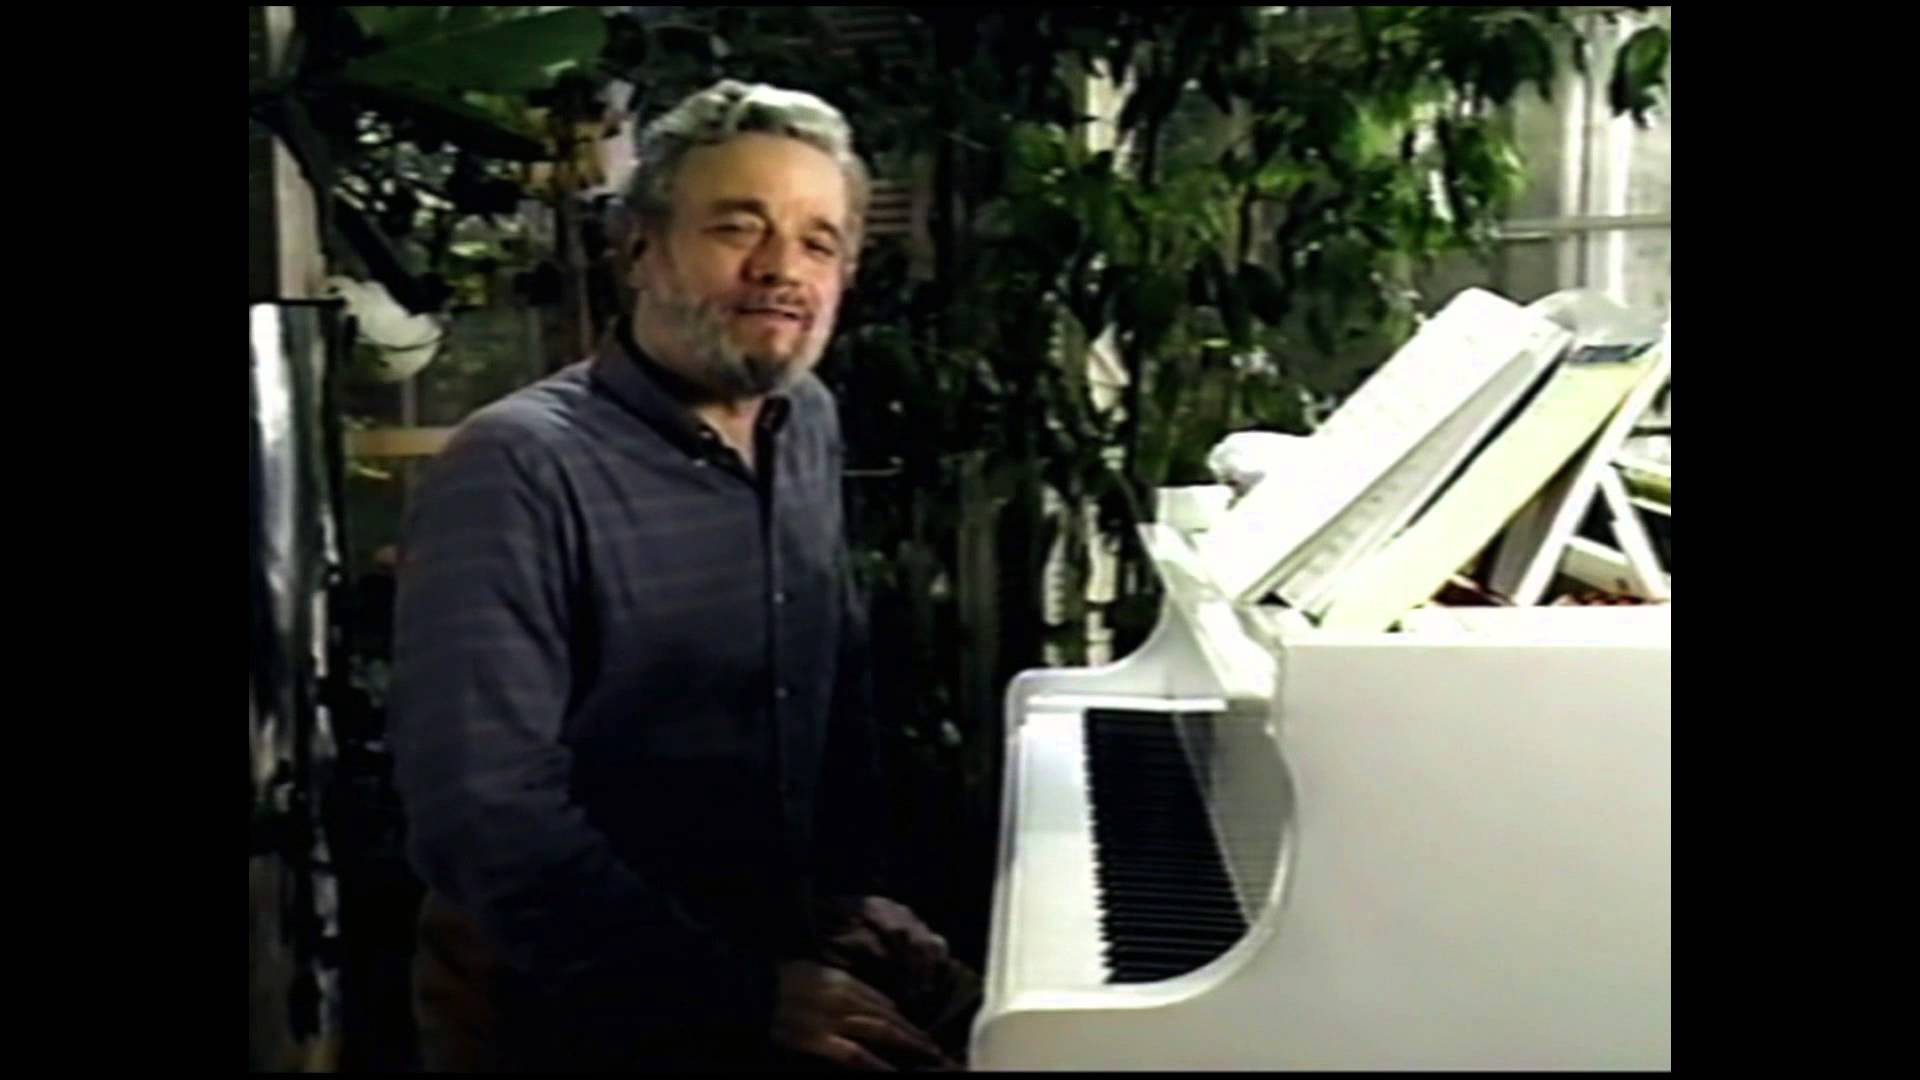 Stephen Sondheim on "No More" and "No One is Alone"
